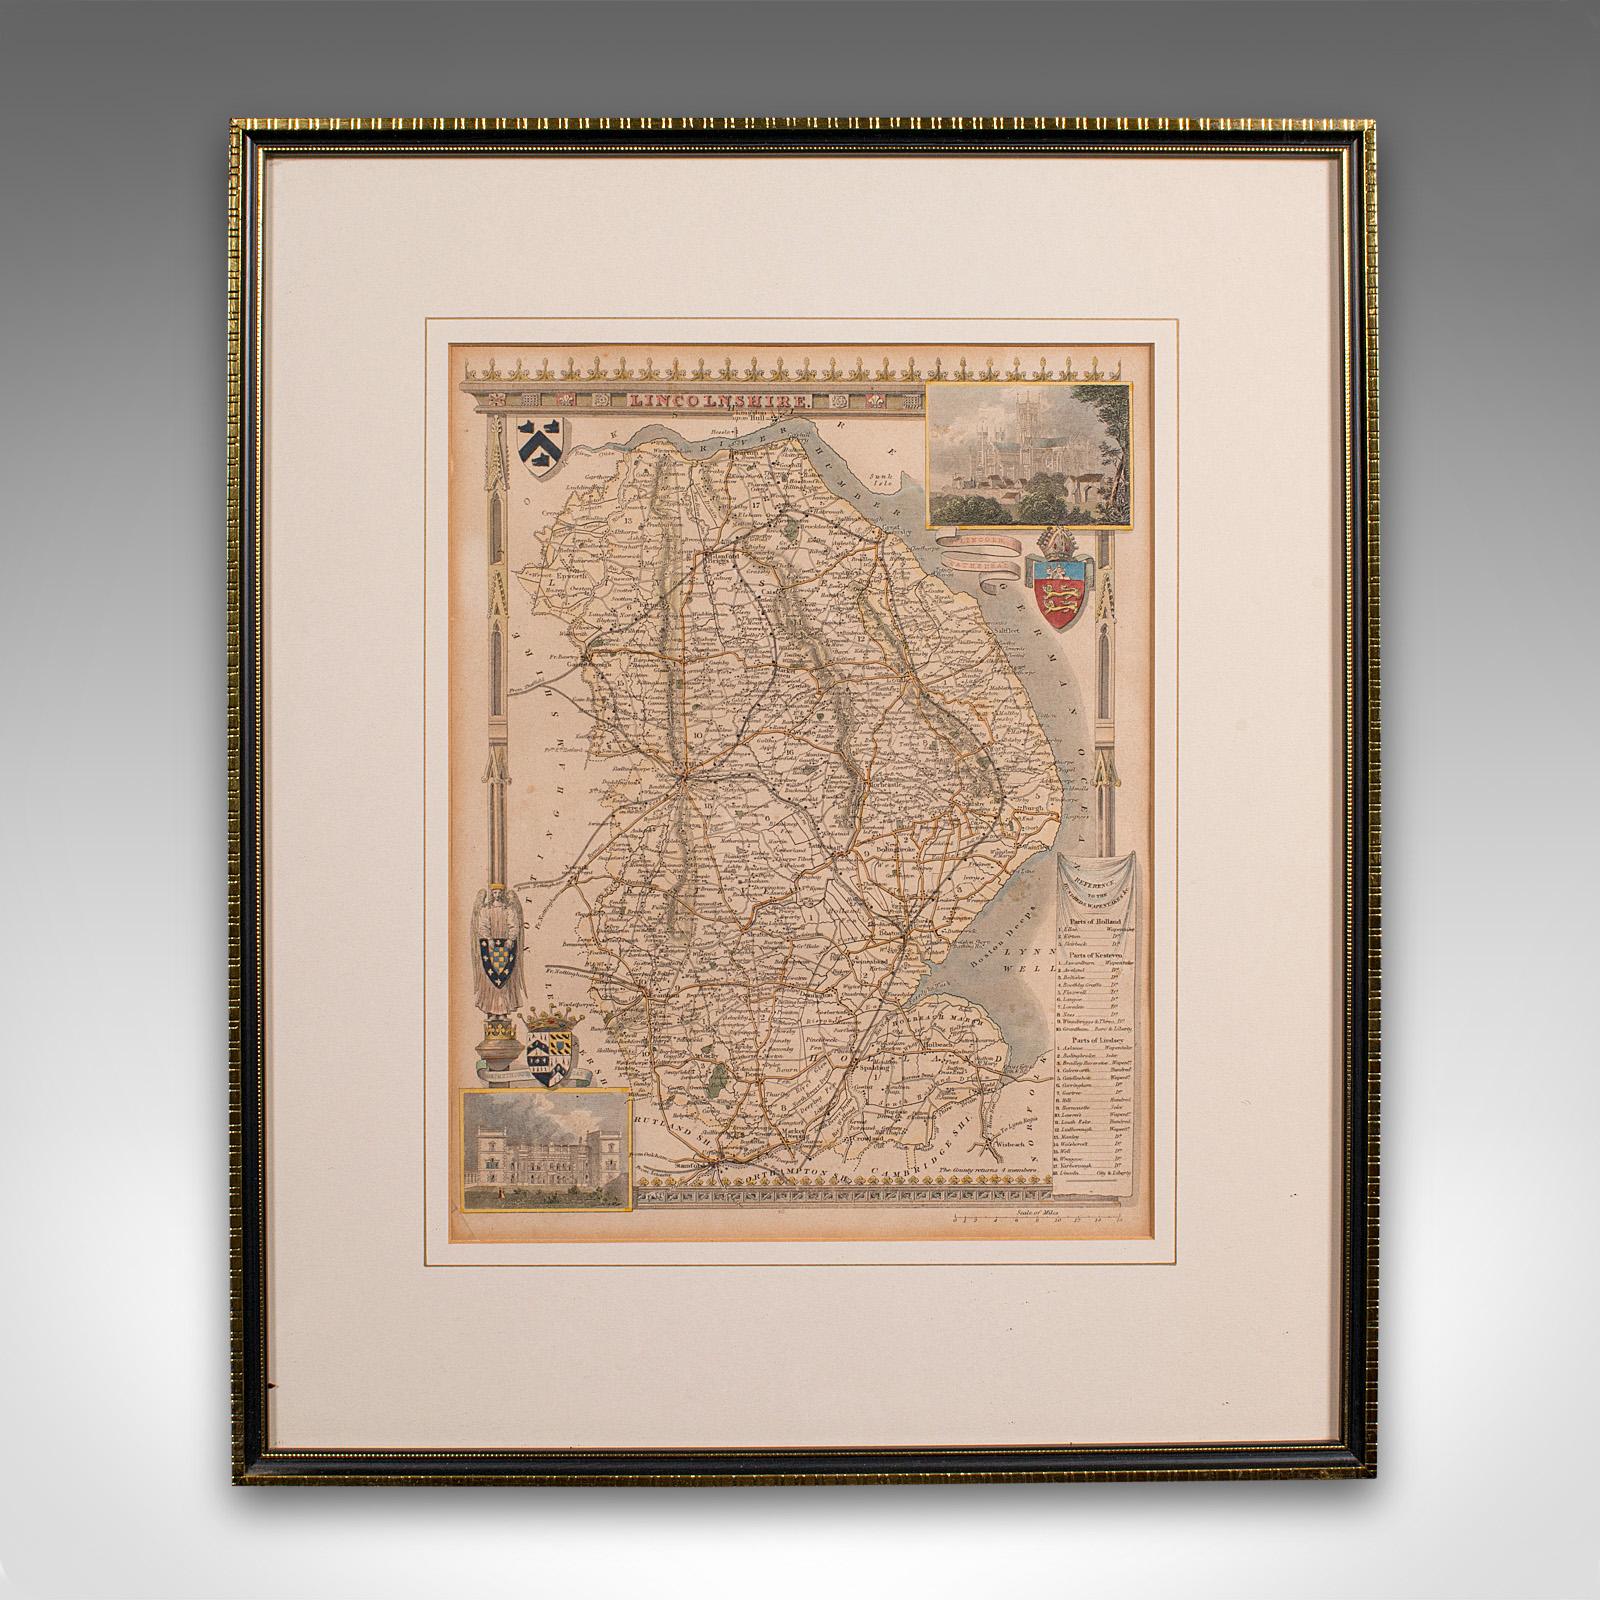 This is an antique lithography map of Lincolnshire. An English, framed atlas engraving of cartographic interest, dating to the mid 19th century and later.

Superb lithography of Lincolnshire and its county detail, perfect for display
Displaying a